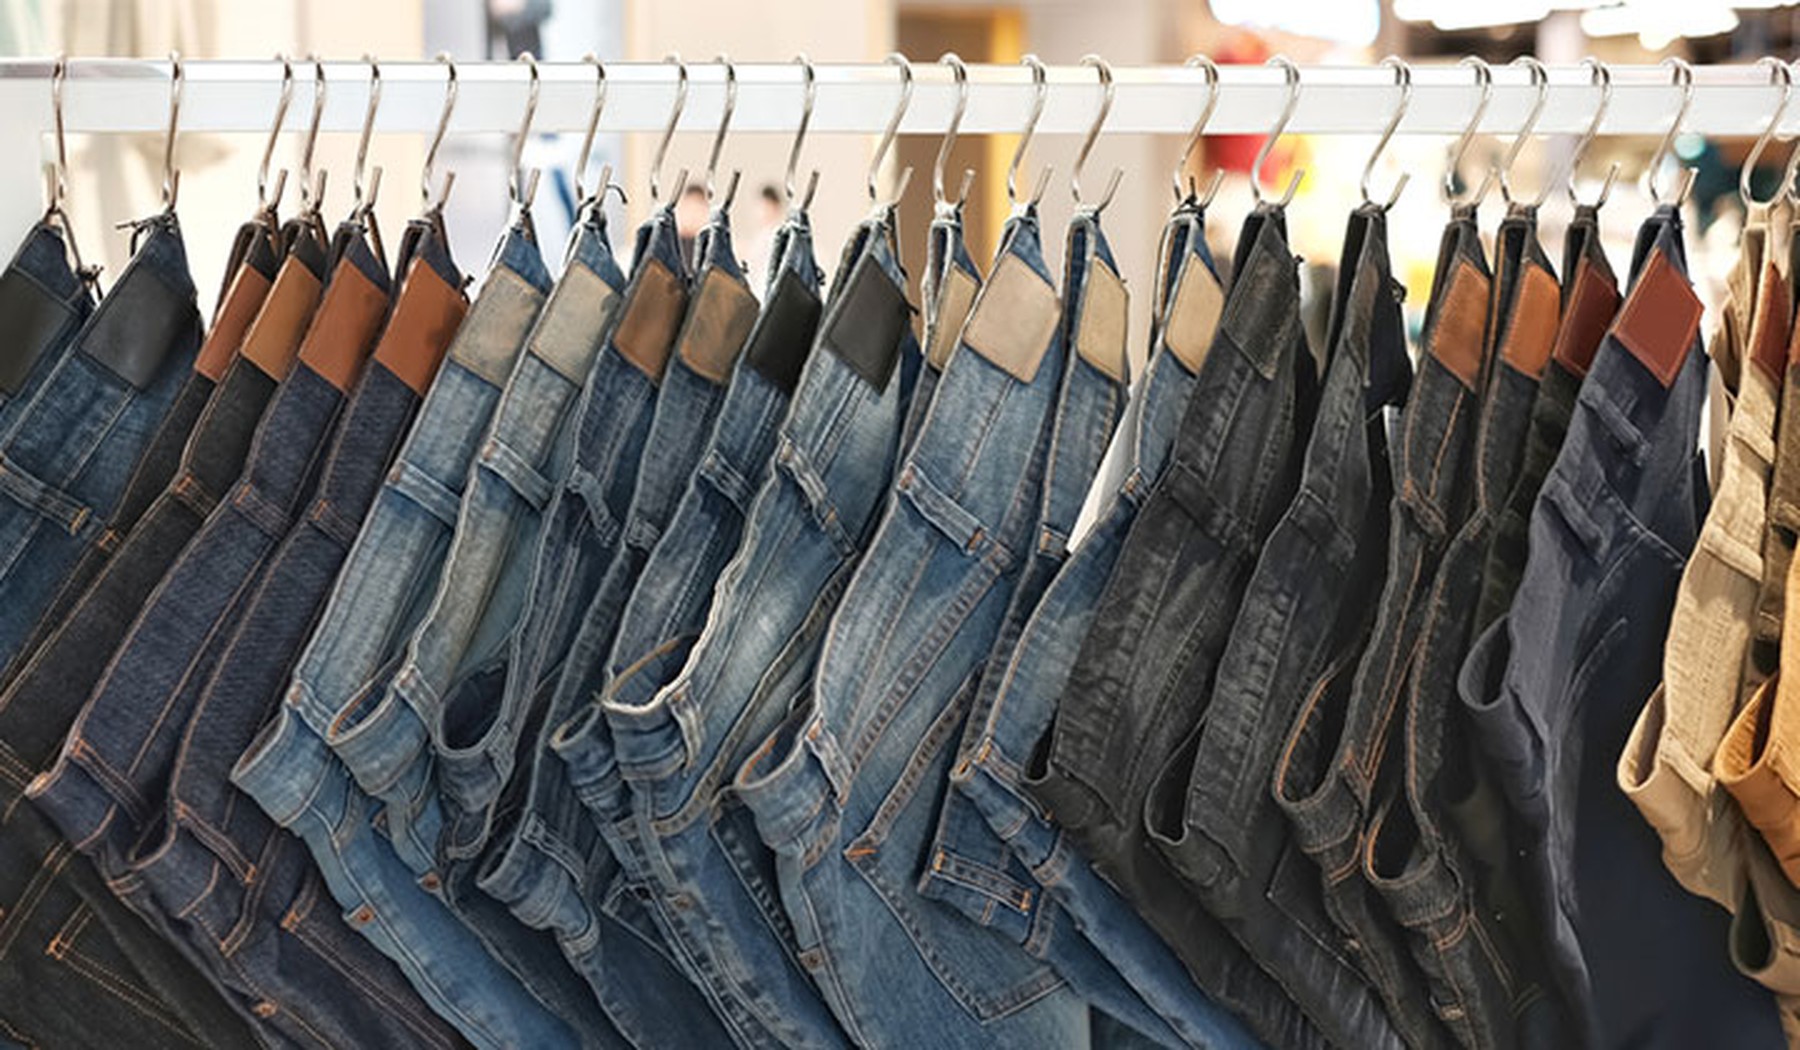 Row of hanging jeans